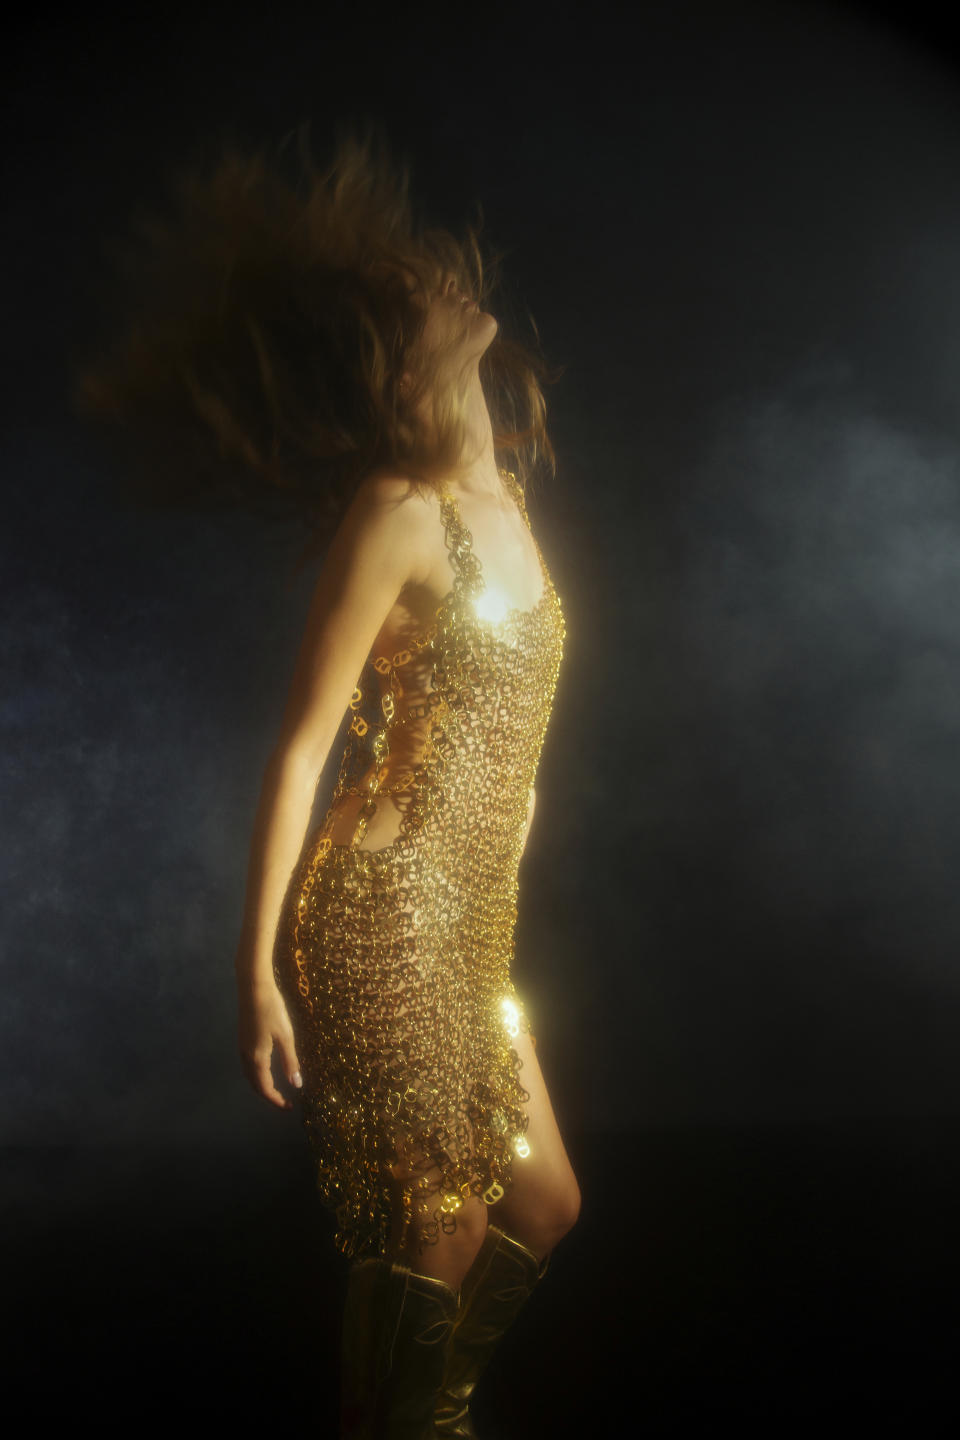 A dress by Aya Muse from the Club Moda campaign.